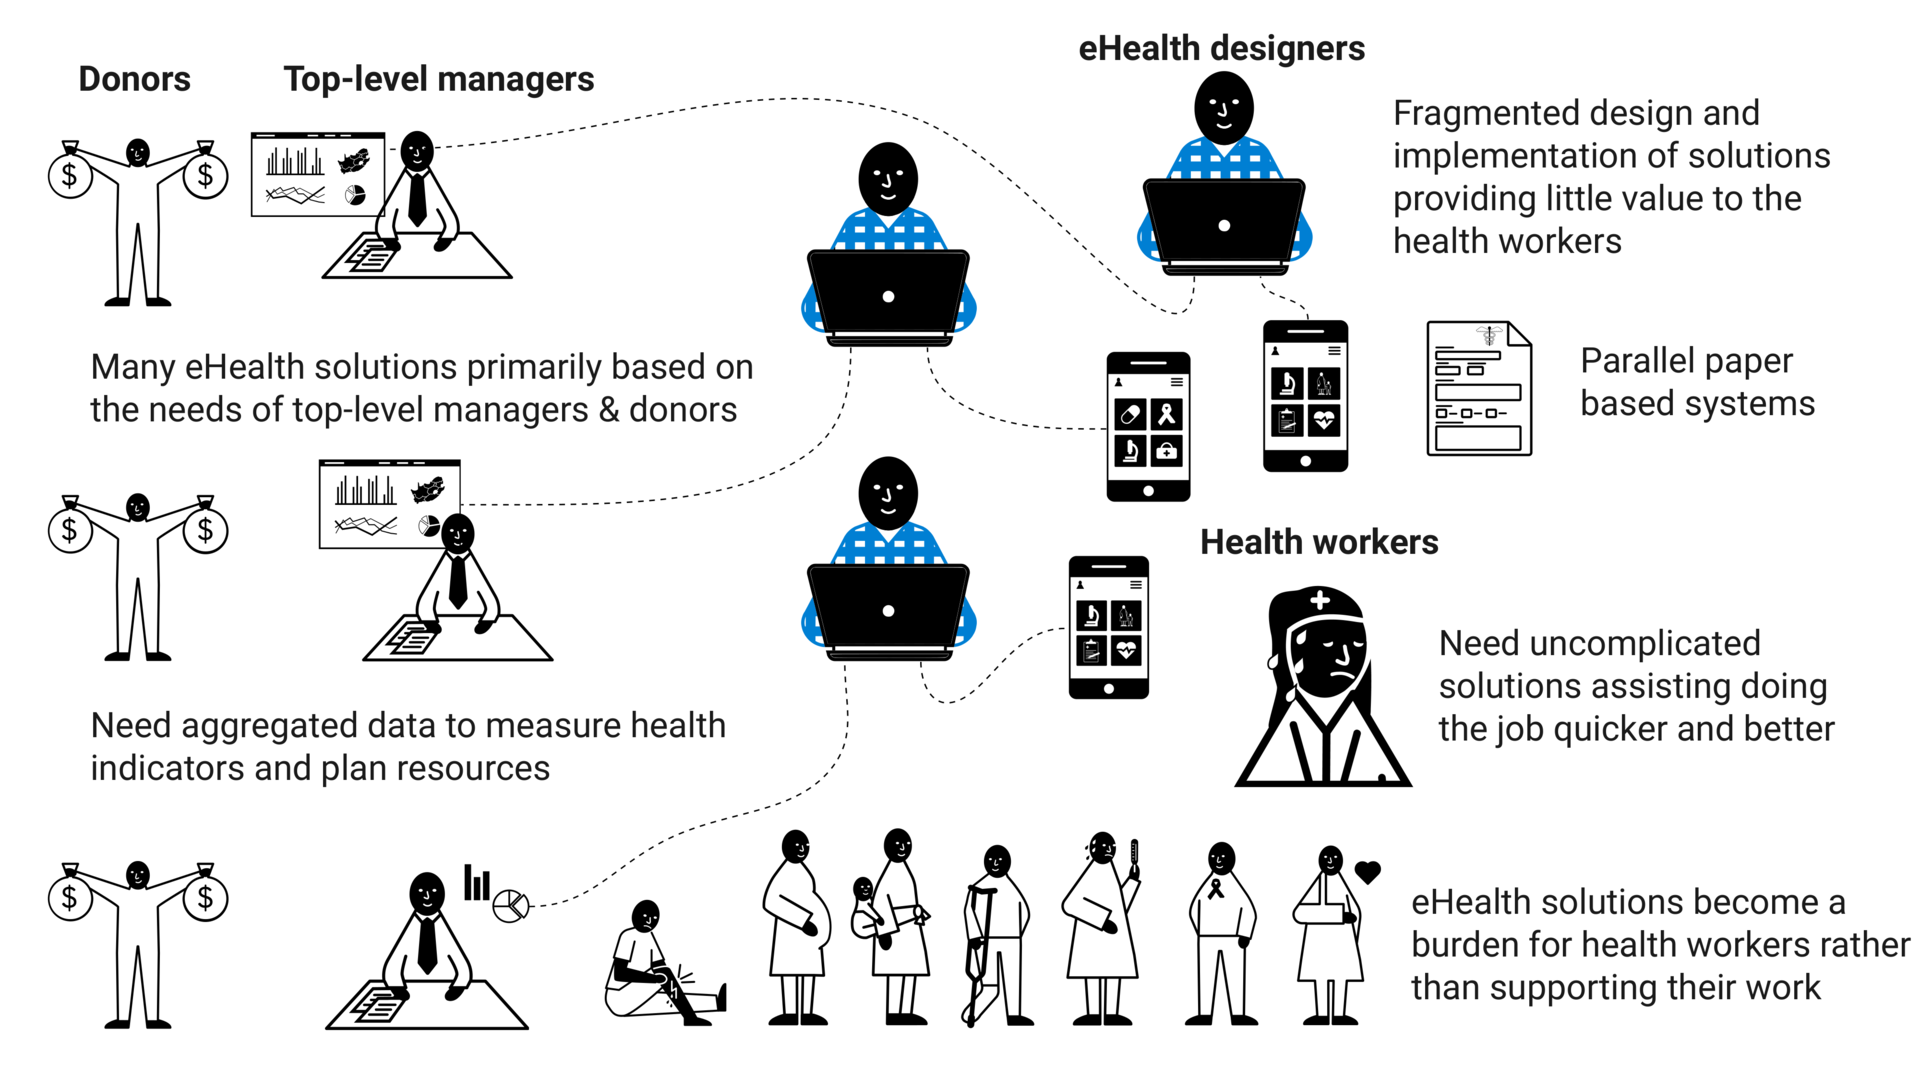 The real world problem: Many eHealth solutions primarily based on the needs of top-level managers & donors who need aggregated data to measure health indicators and plan resources. Health workers who needs uncomplicated solutions assisting doing the job quicker and better, are instead provided fragmented implementation of solutions, parallel paper based systems, and increased work load. eHealth solutions become a burden for health workers rather than supporting their work to assist healthcare recipients.